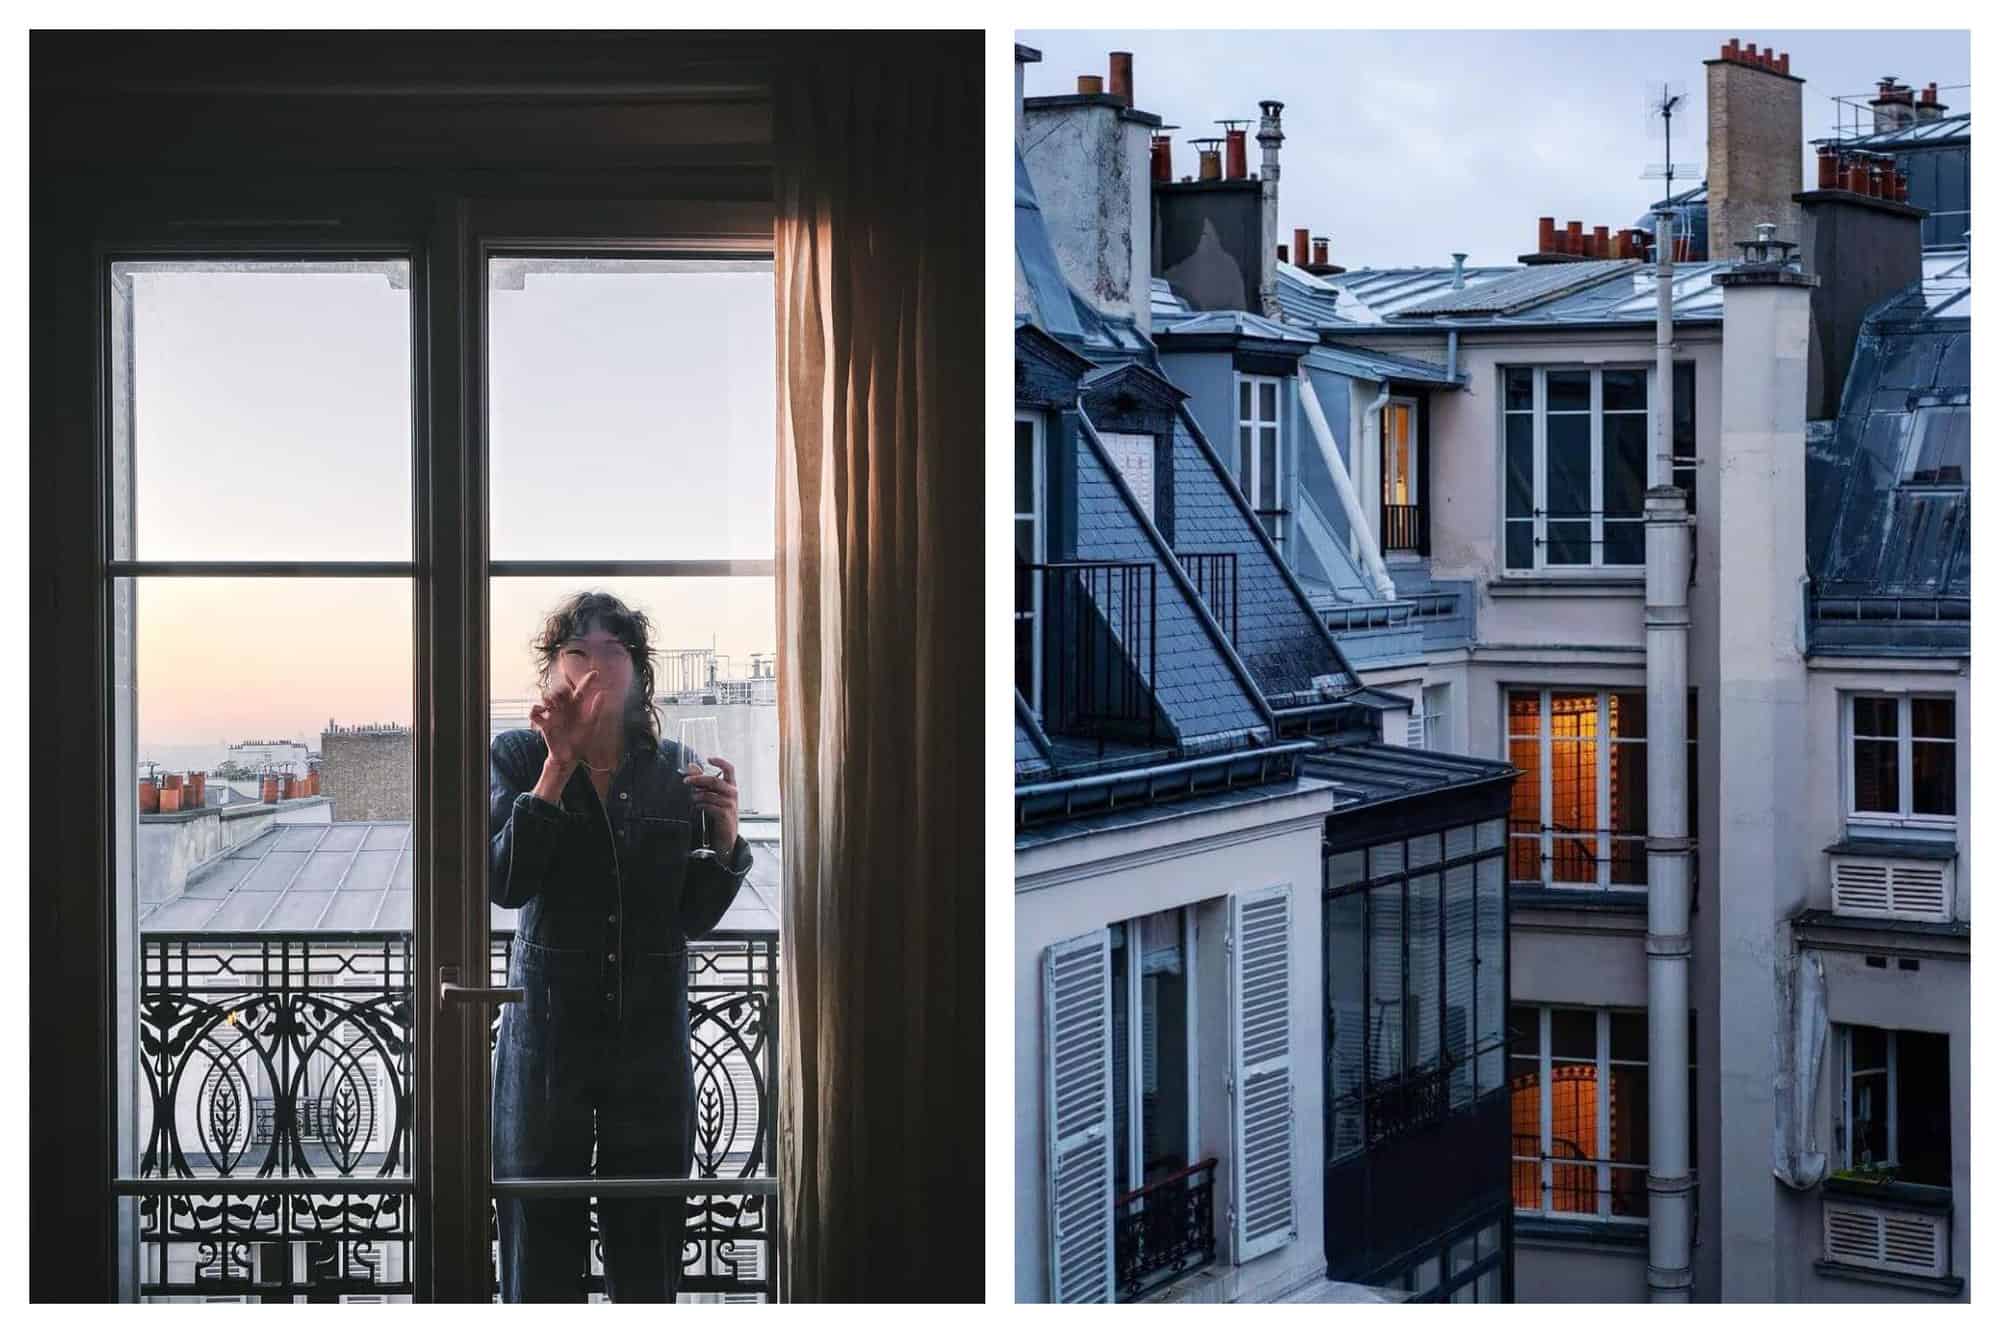 Left: a woman wearing a jean romper standing outside on a balcony in Paris. The glass window leading out to the balcony is closed and the woman is drawing a heart on a portion of the glass that is foggy. She has a glass on wine in her hand. Right: a view from a Parisian apartment. There are several other apartment buildings visible and there are two windows lit up with an orange glow from the lights inside the apartments. The buildings are white, black, and gray.